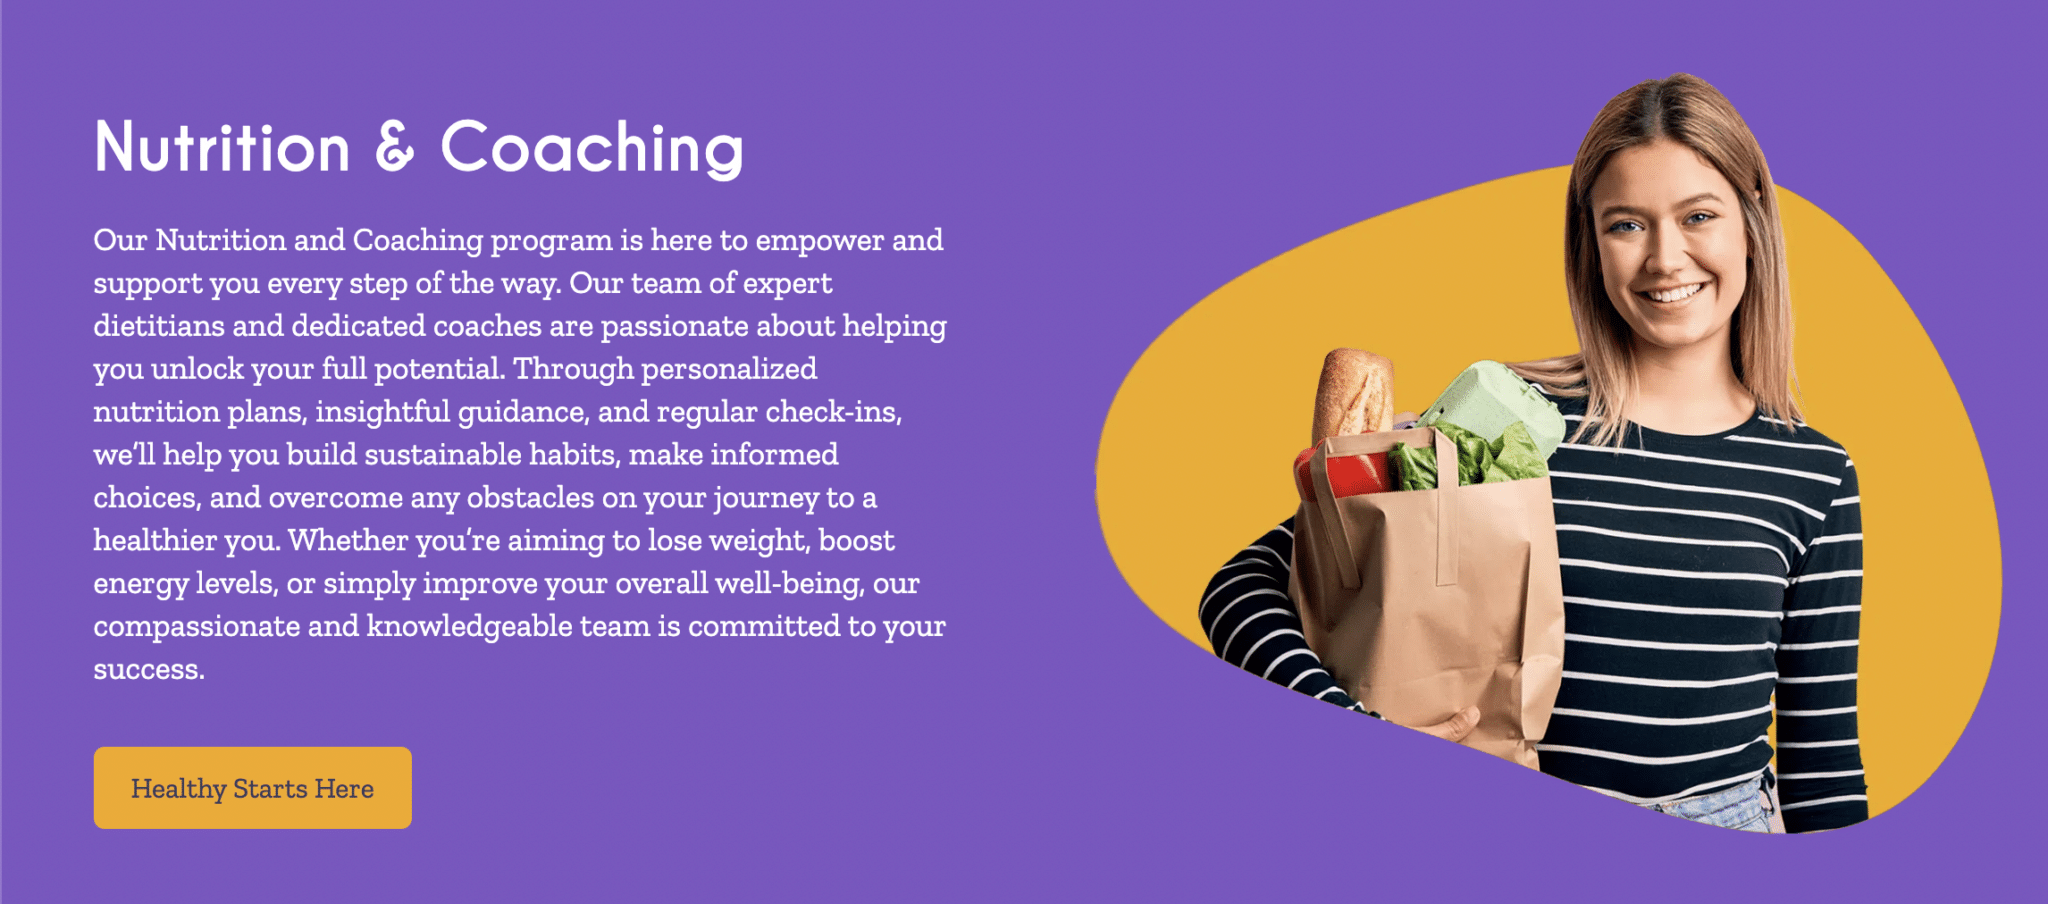 Dietitian Group Nutrition and Coaching webpage with a person standing, holding a paper grocery bag filled with groceries.